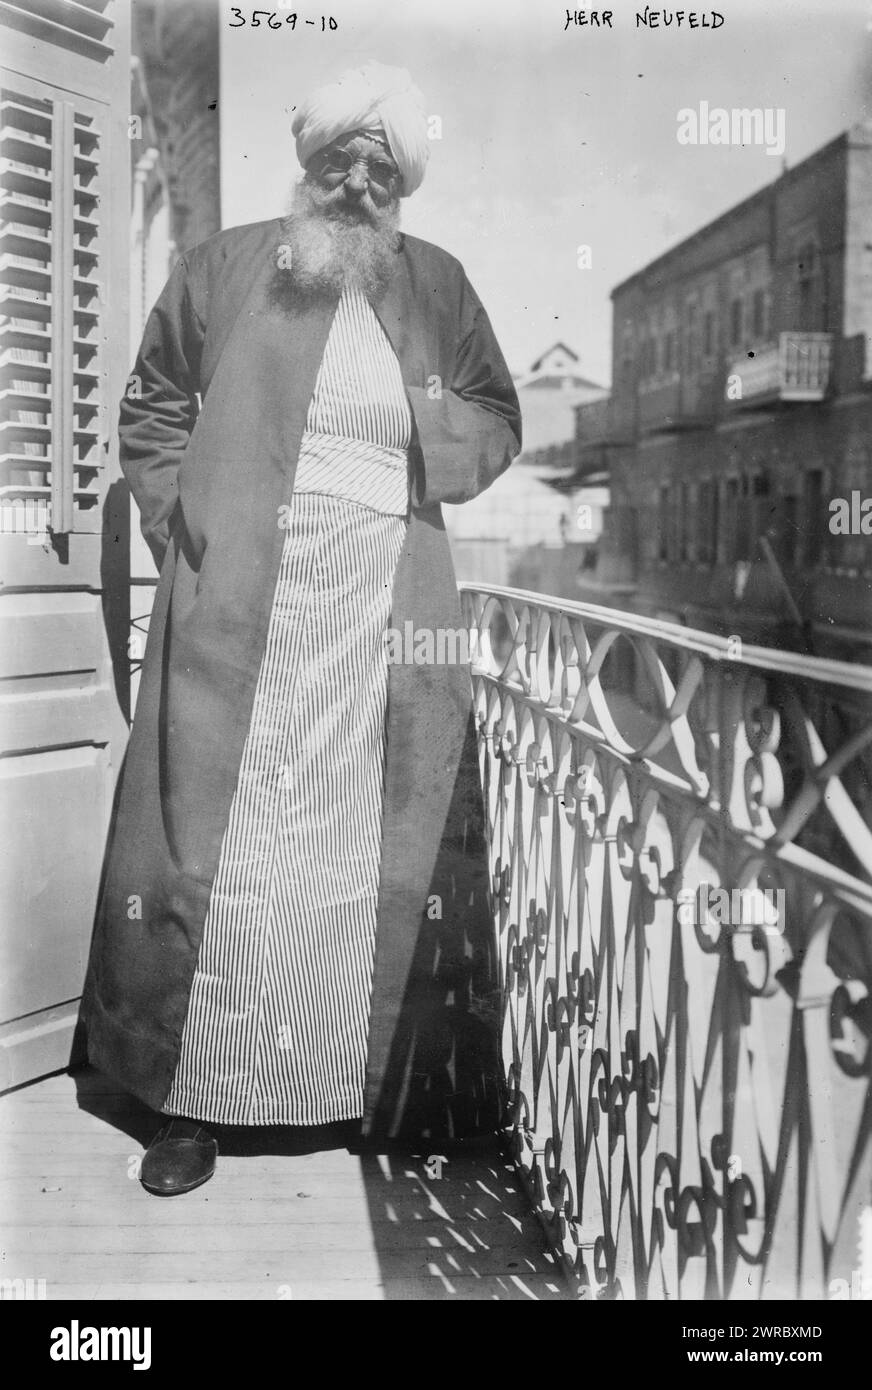 Herr Neufeld, Photograph shows Charles (Karl) Neufeld who was a prisoner in Sudan for twelve years., between ca. 1910 and ca. 1915, Glass negatives, 1 negative: glass Stock Photo